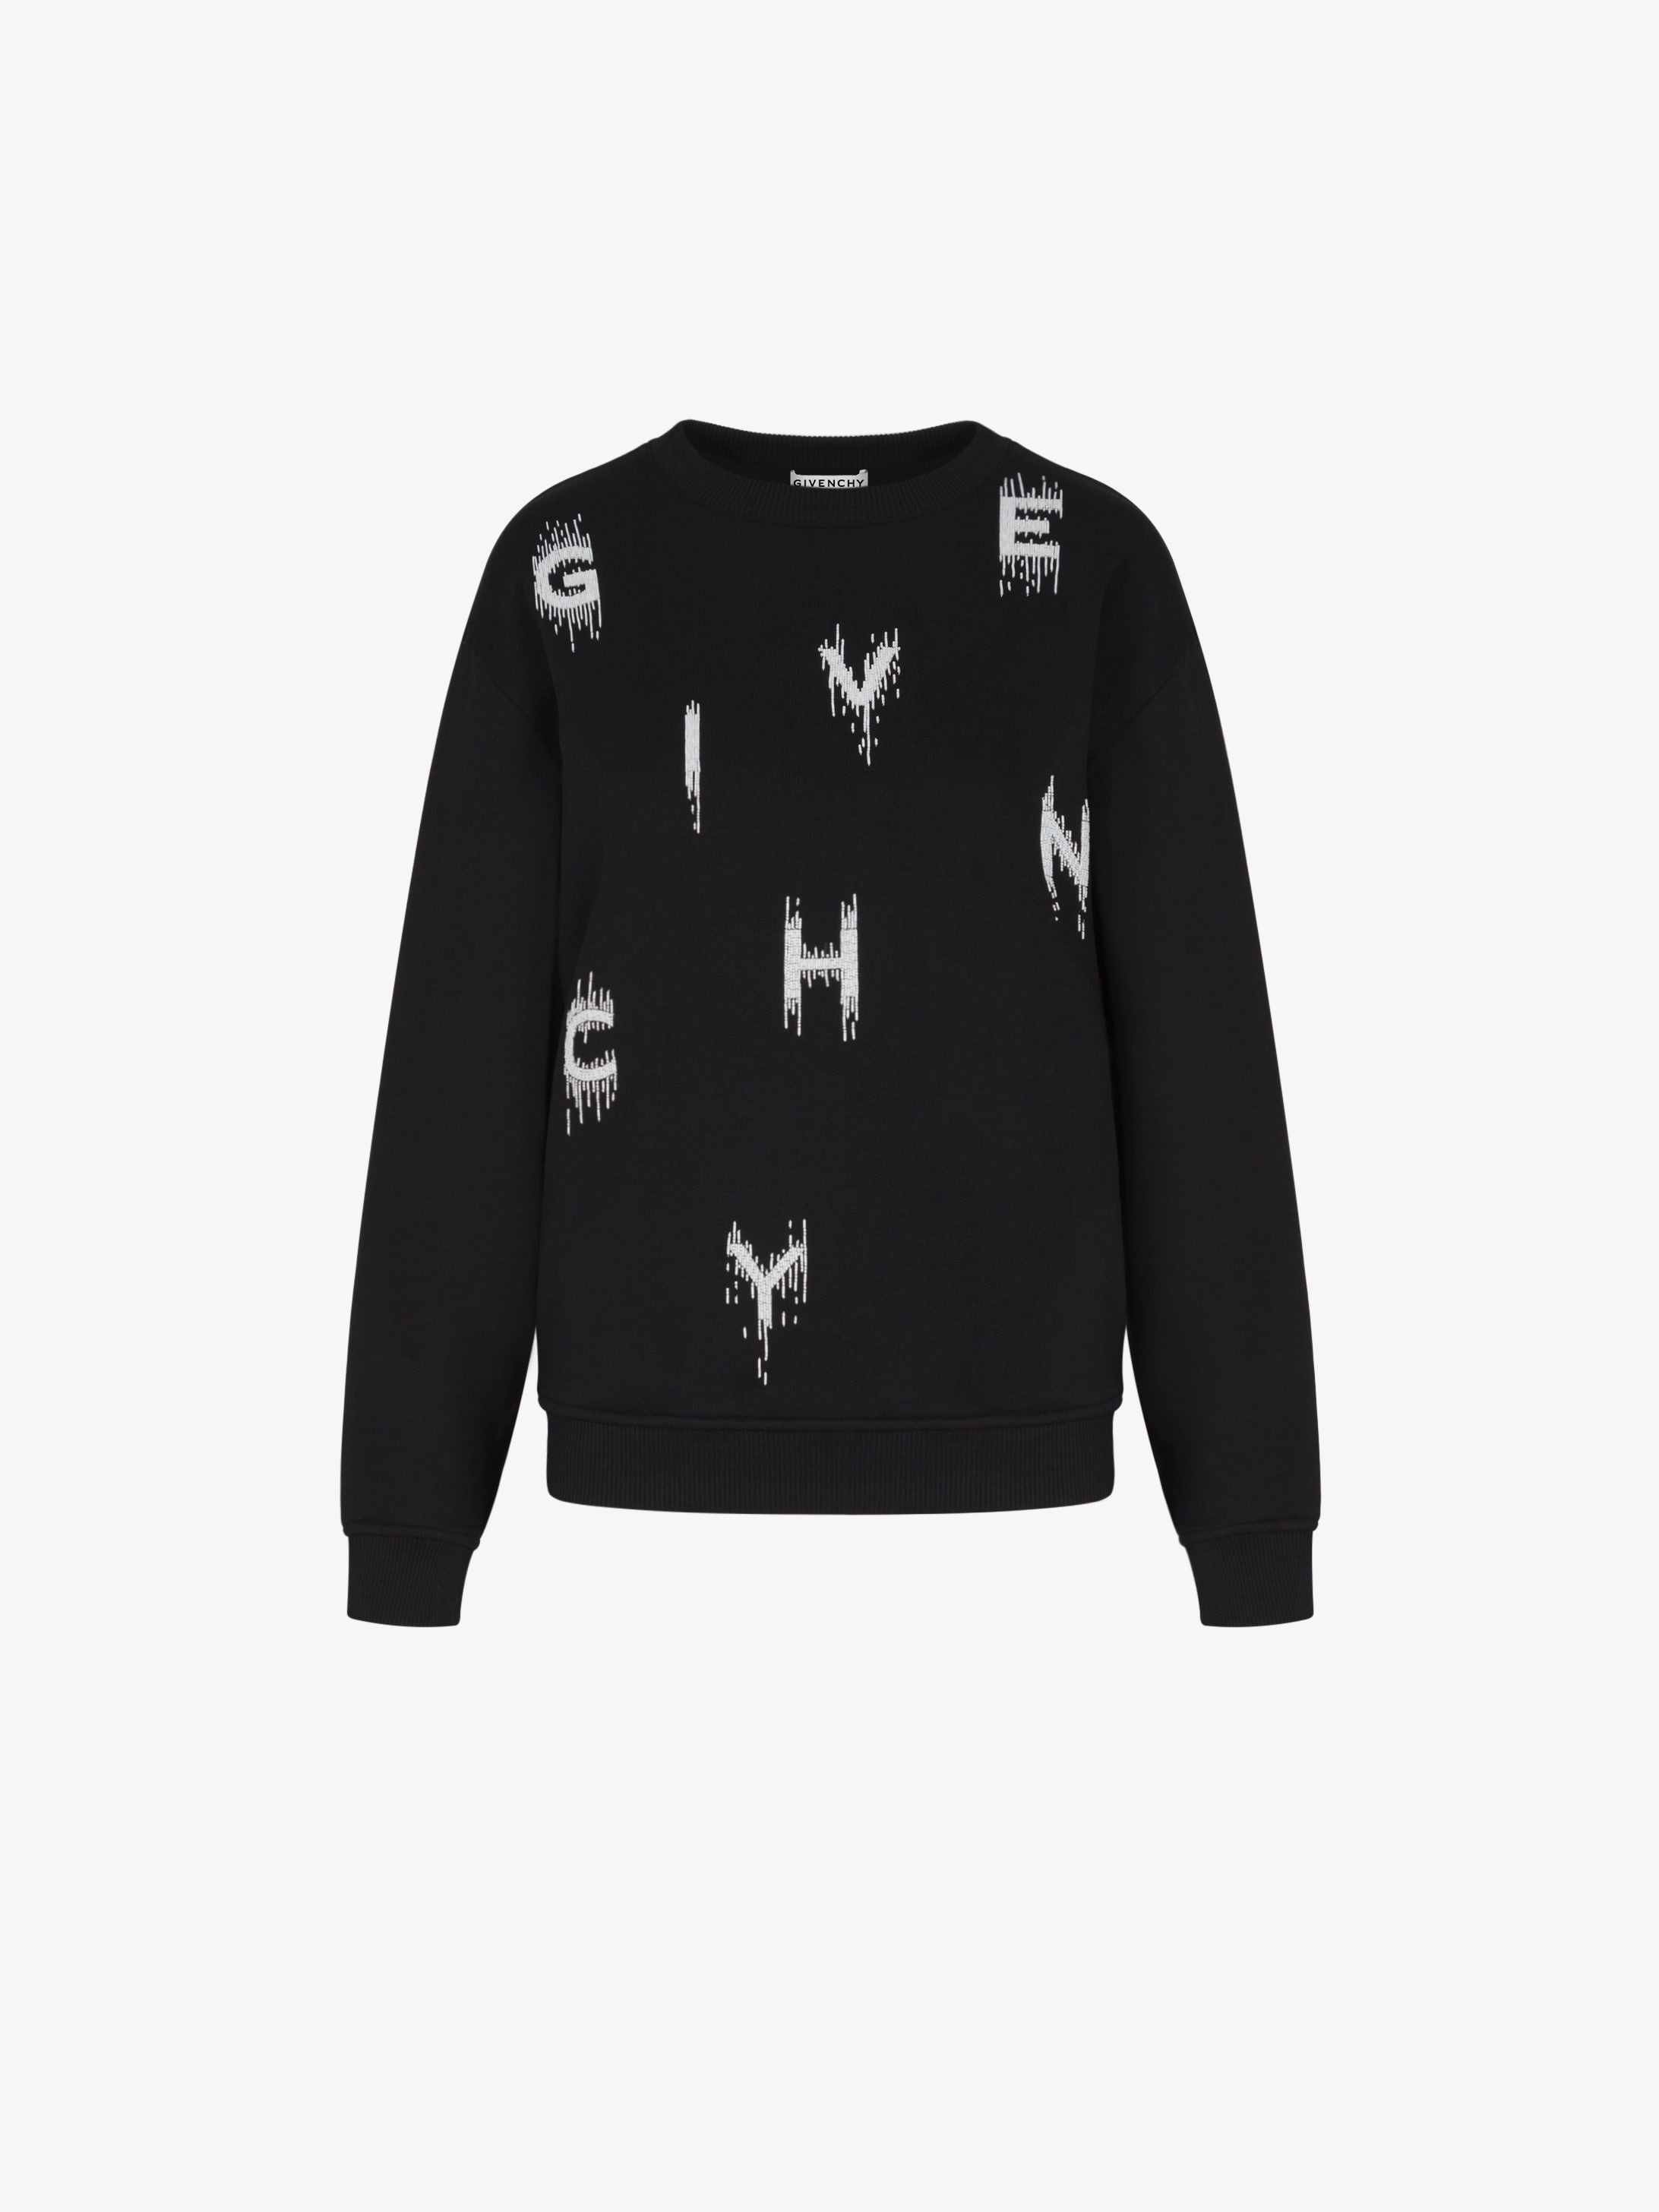 GIVENCHY pearls embroidered sweatshirt | GIVENCHY Paris